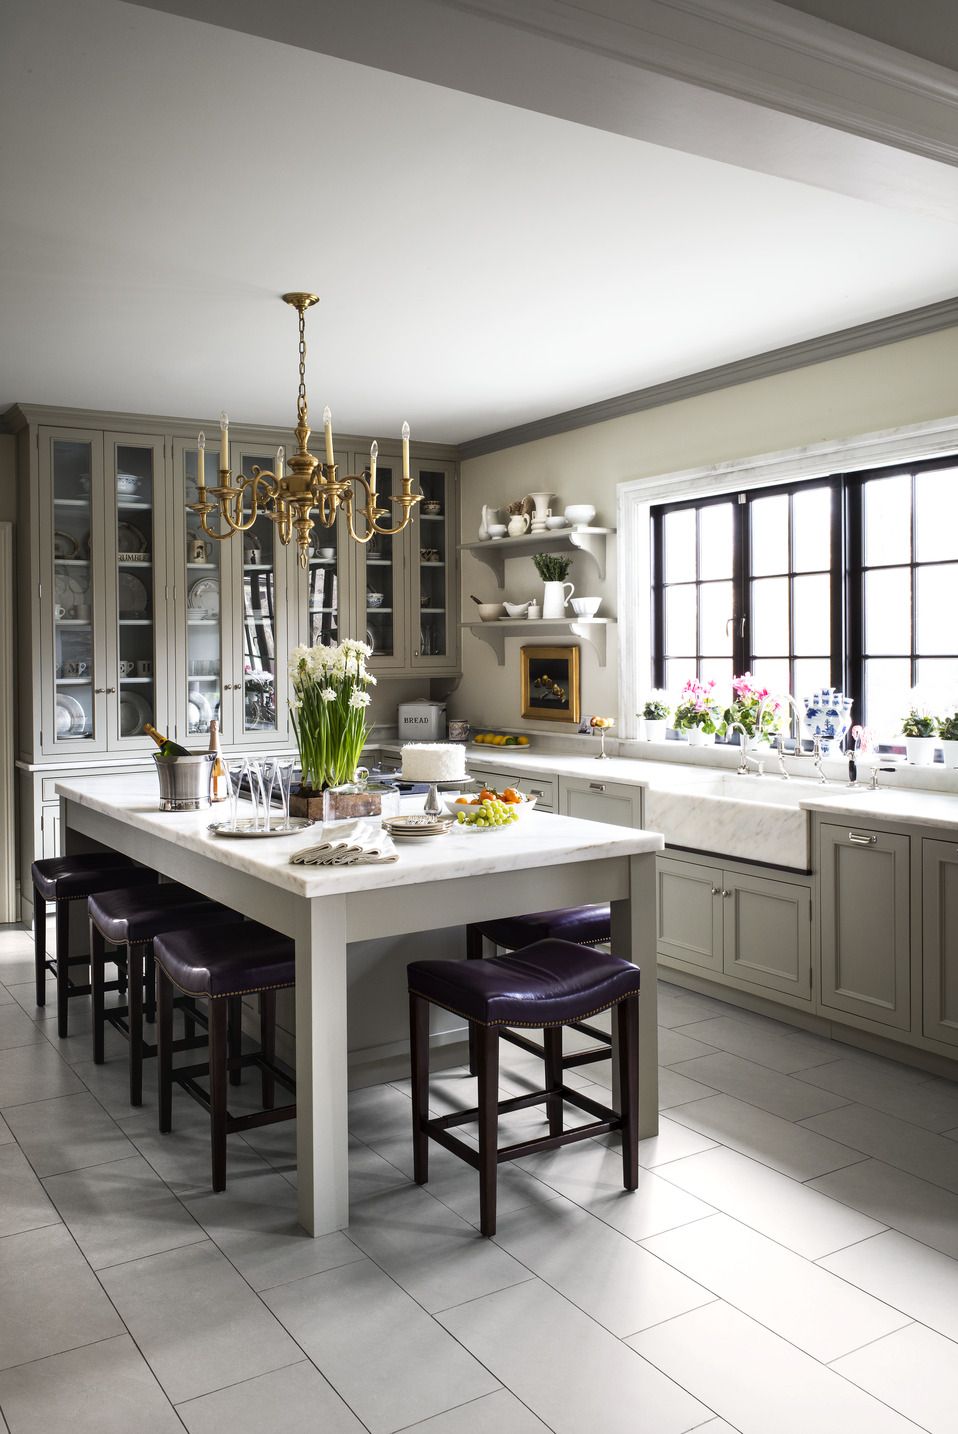 The Best Neutral Paint Colors For Kitchens